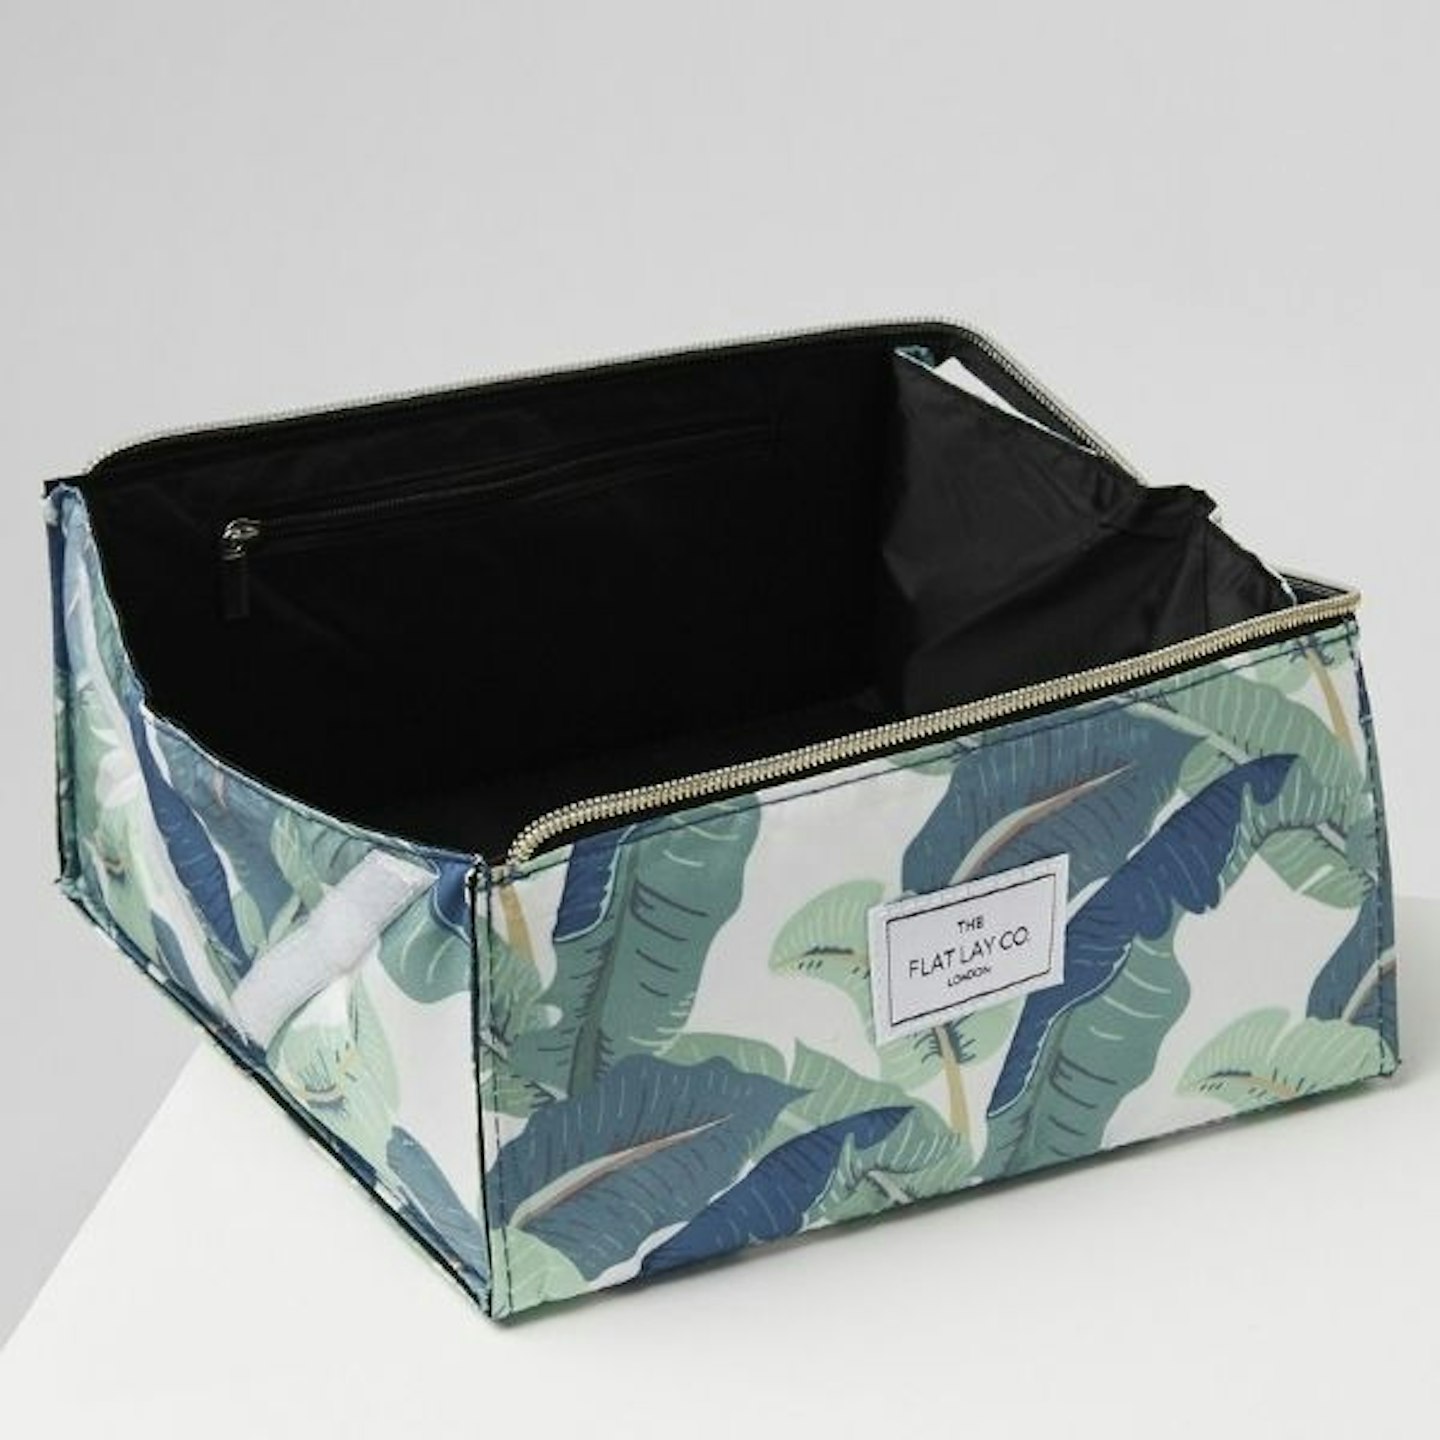 The Flat Lay Co Tropical Leaves Make Up Box